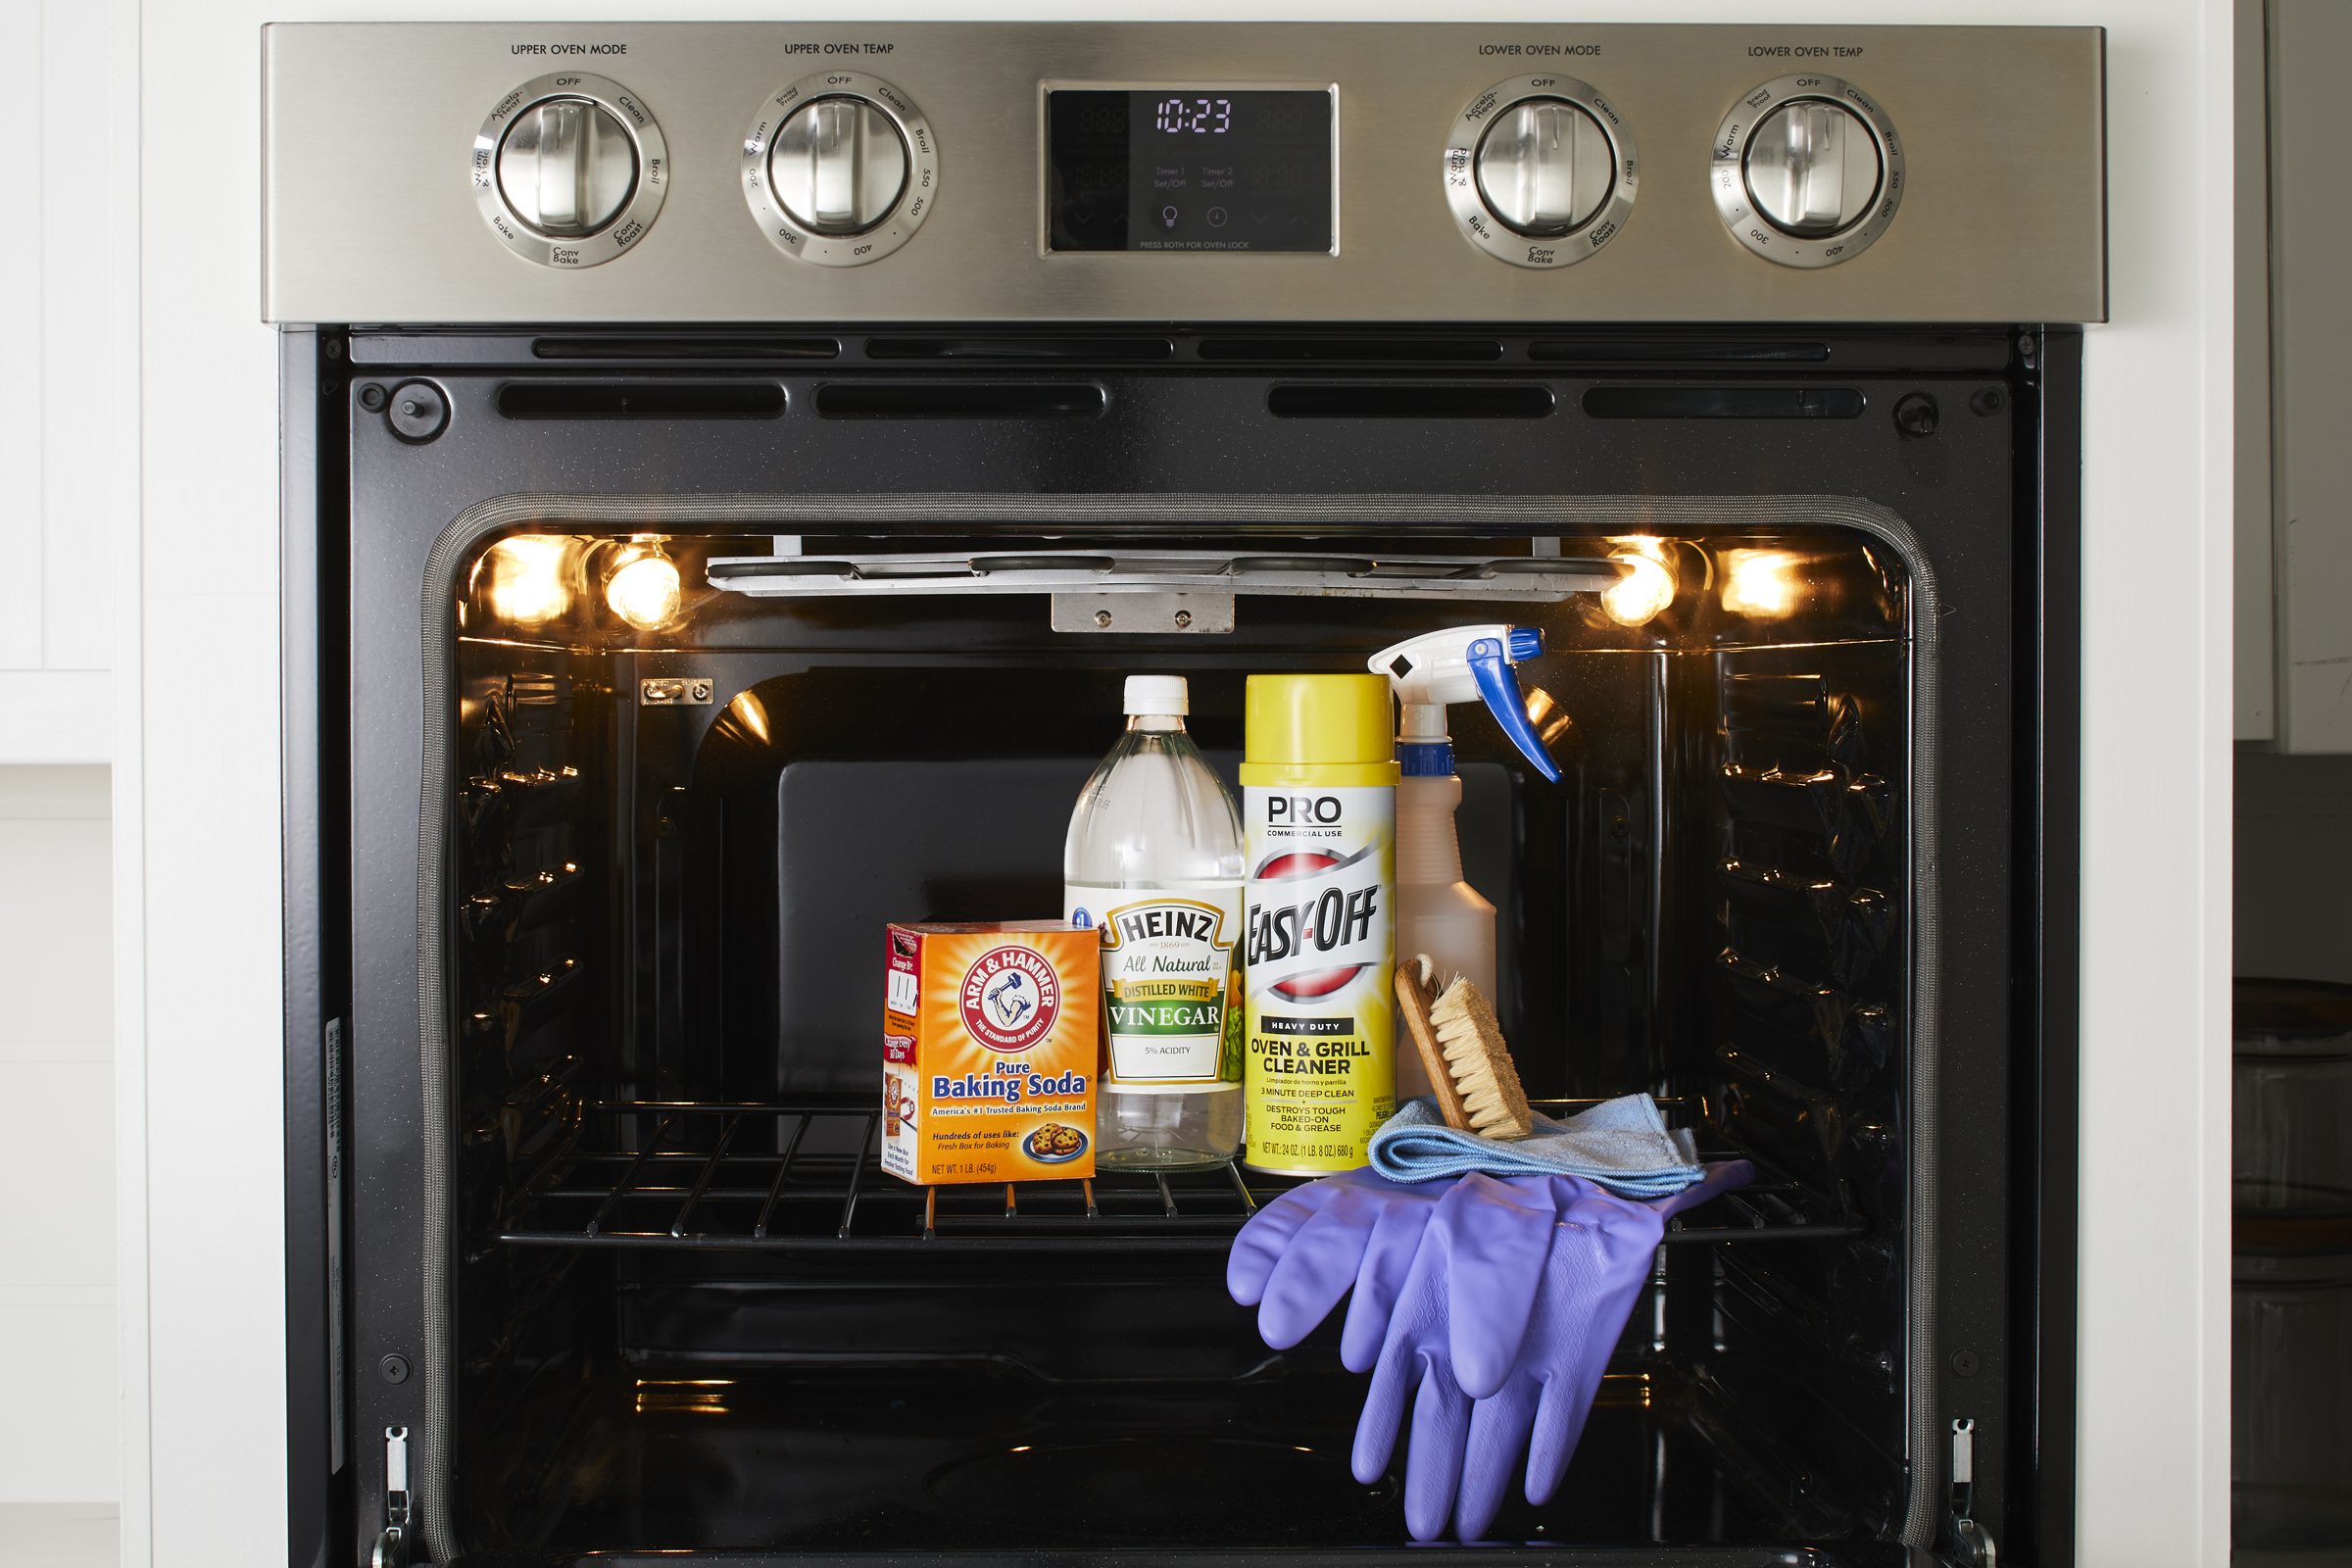 Natural tips for oven cleaning